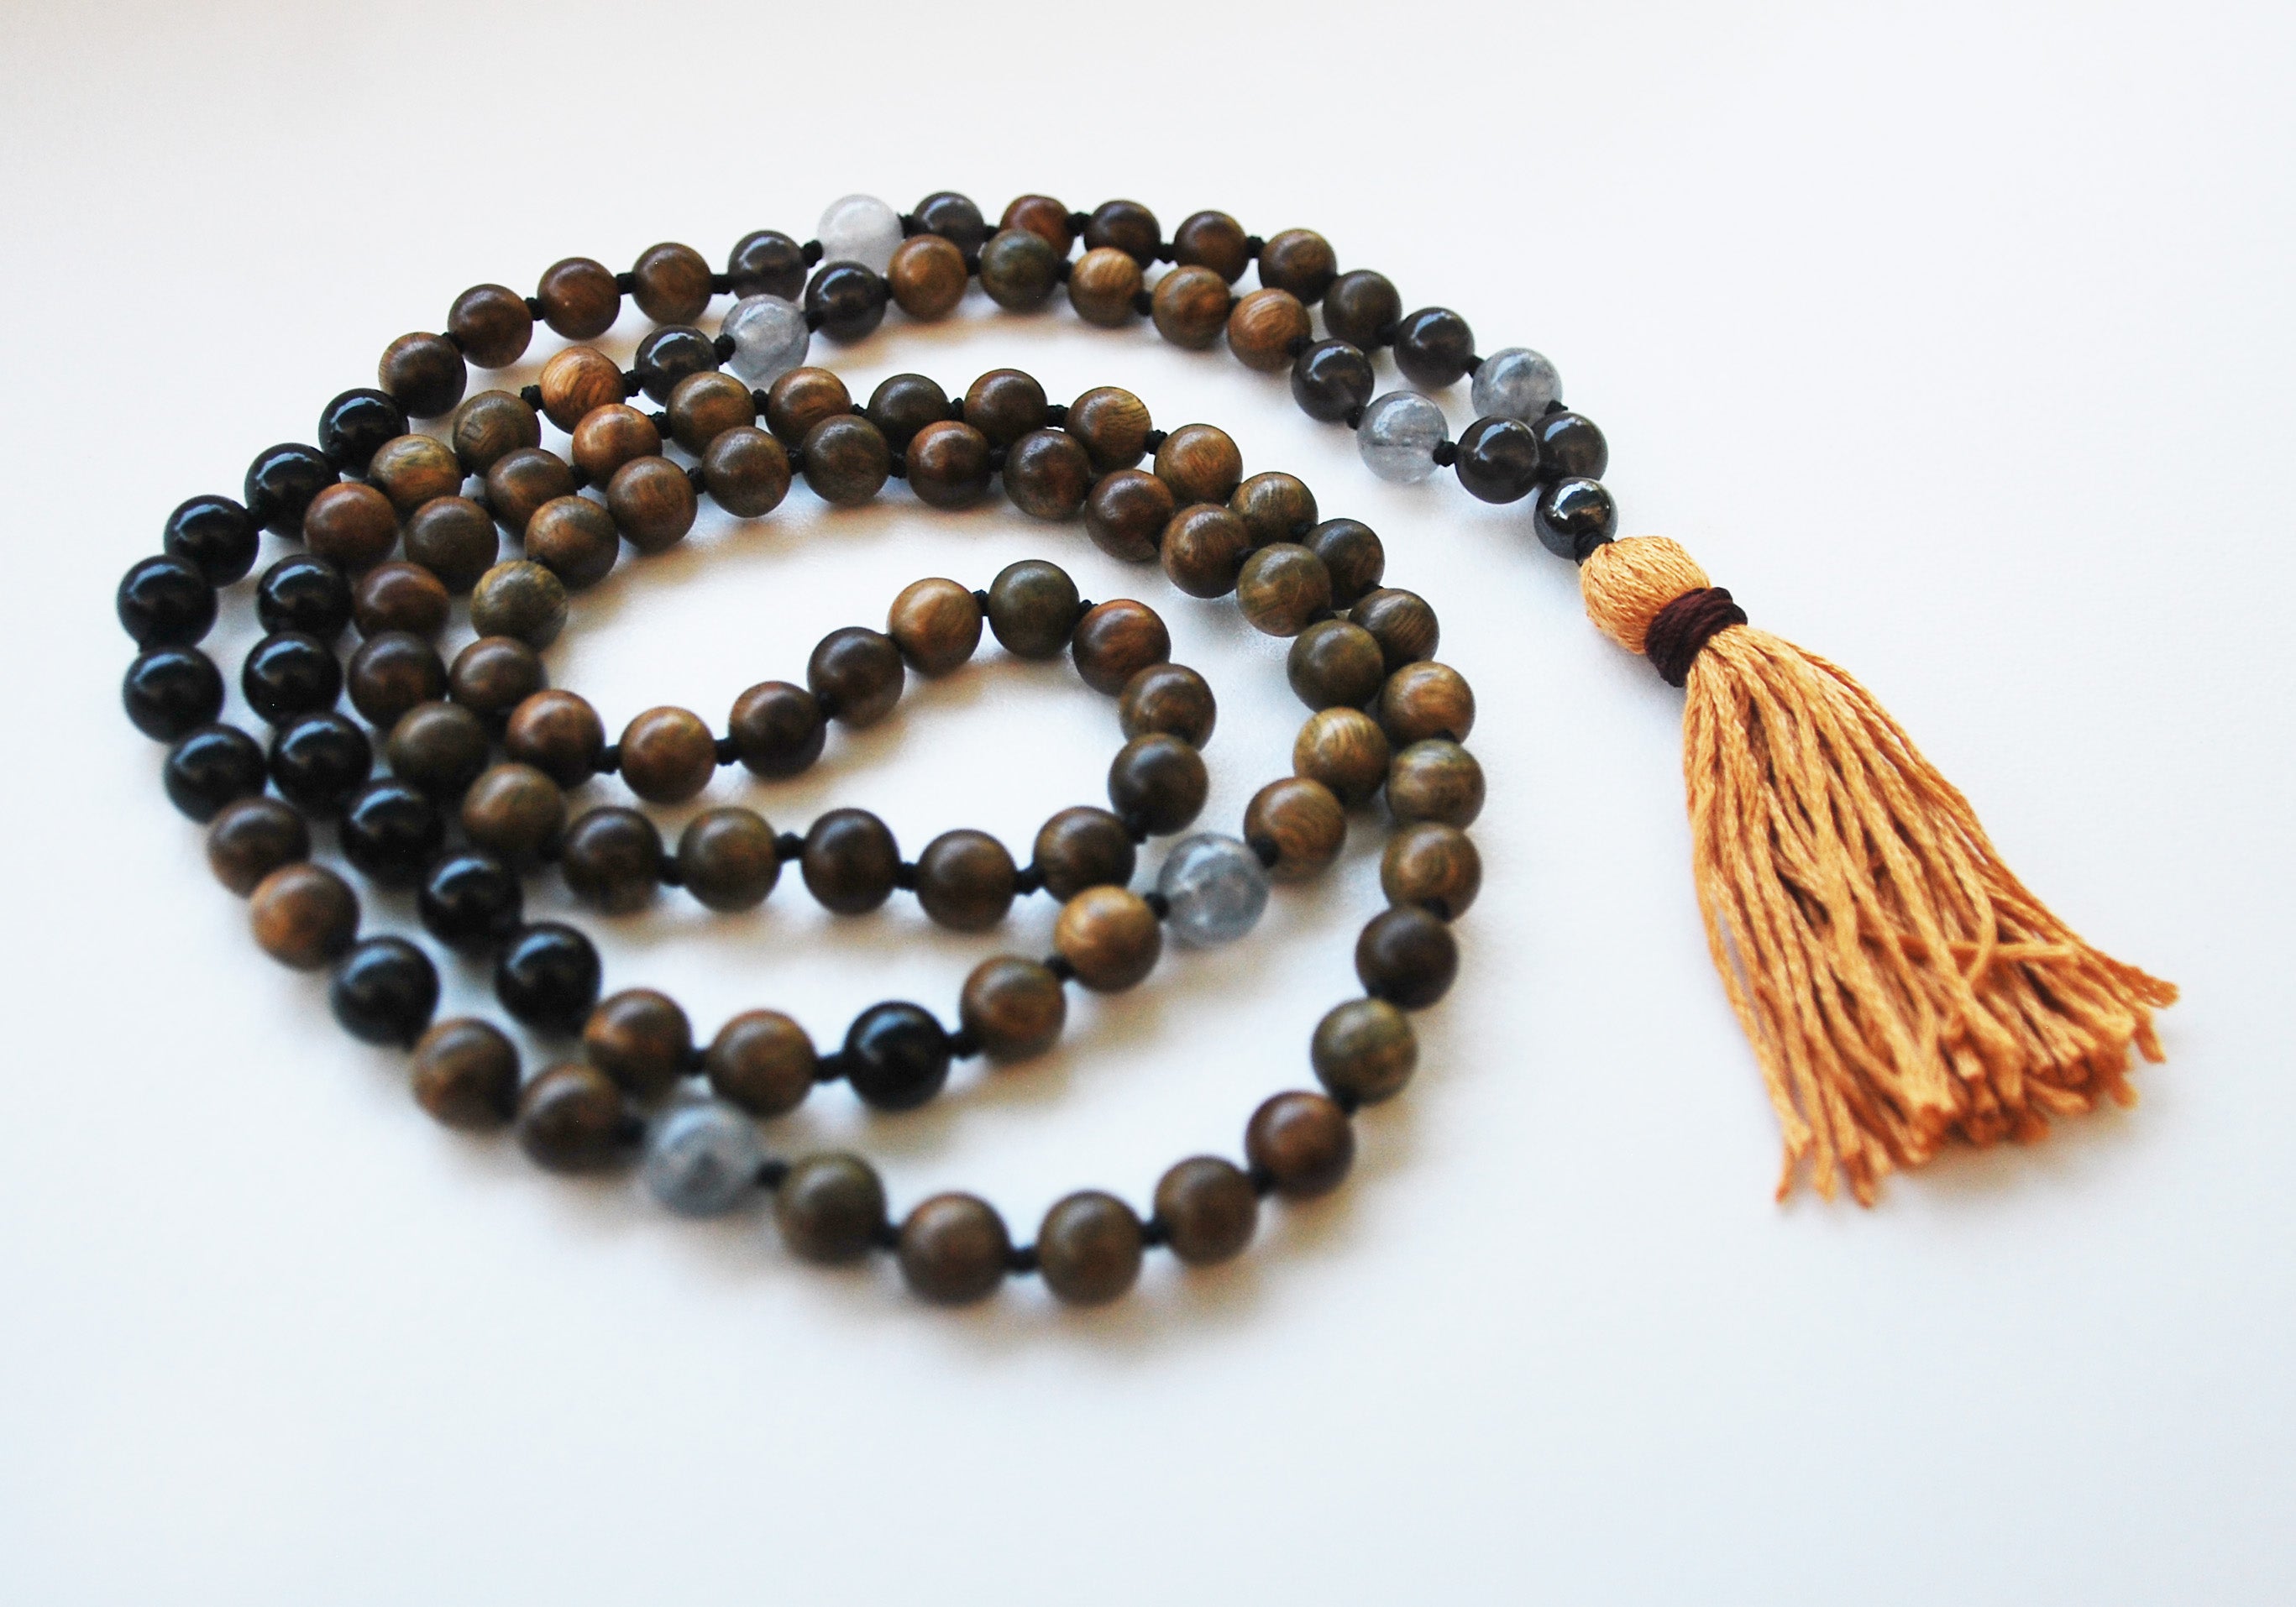 8mm Green Sandalwood & Obsidian 108 Knotted Mala Necklace with Cotton Tassel